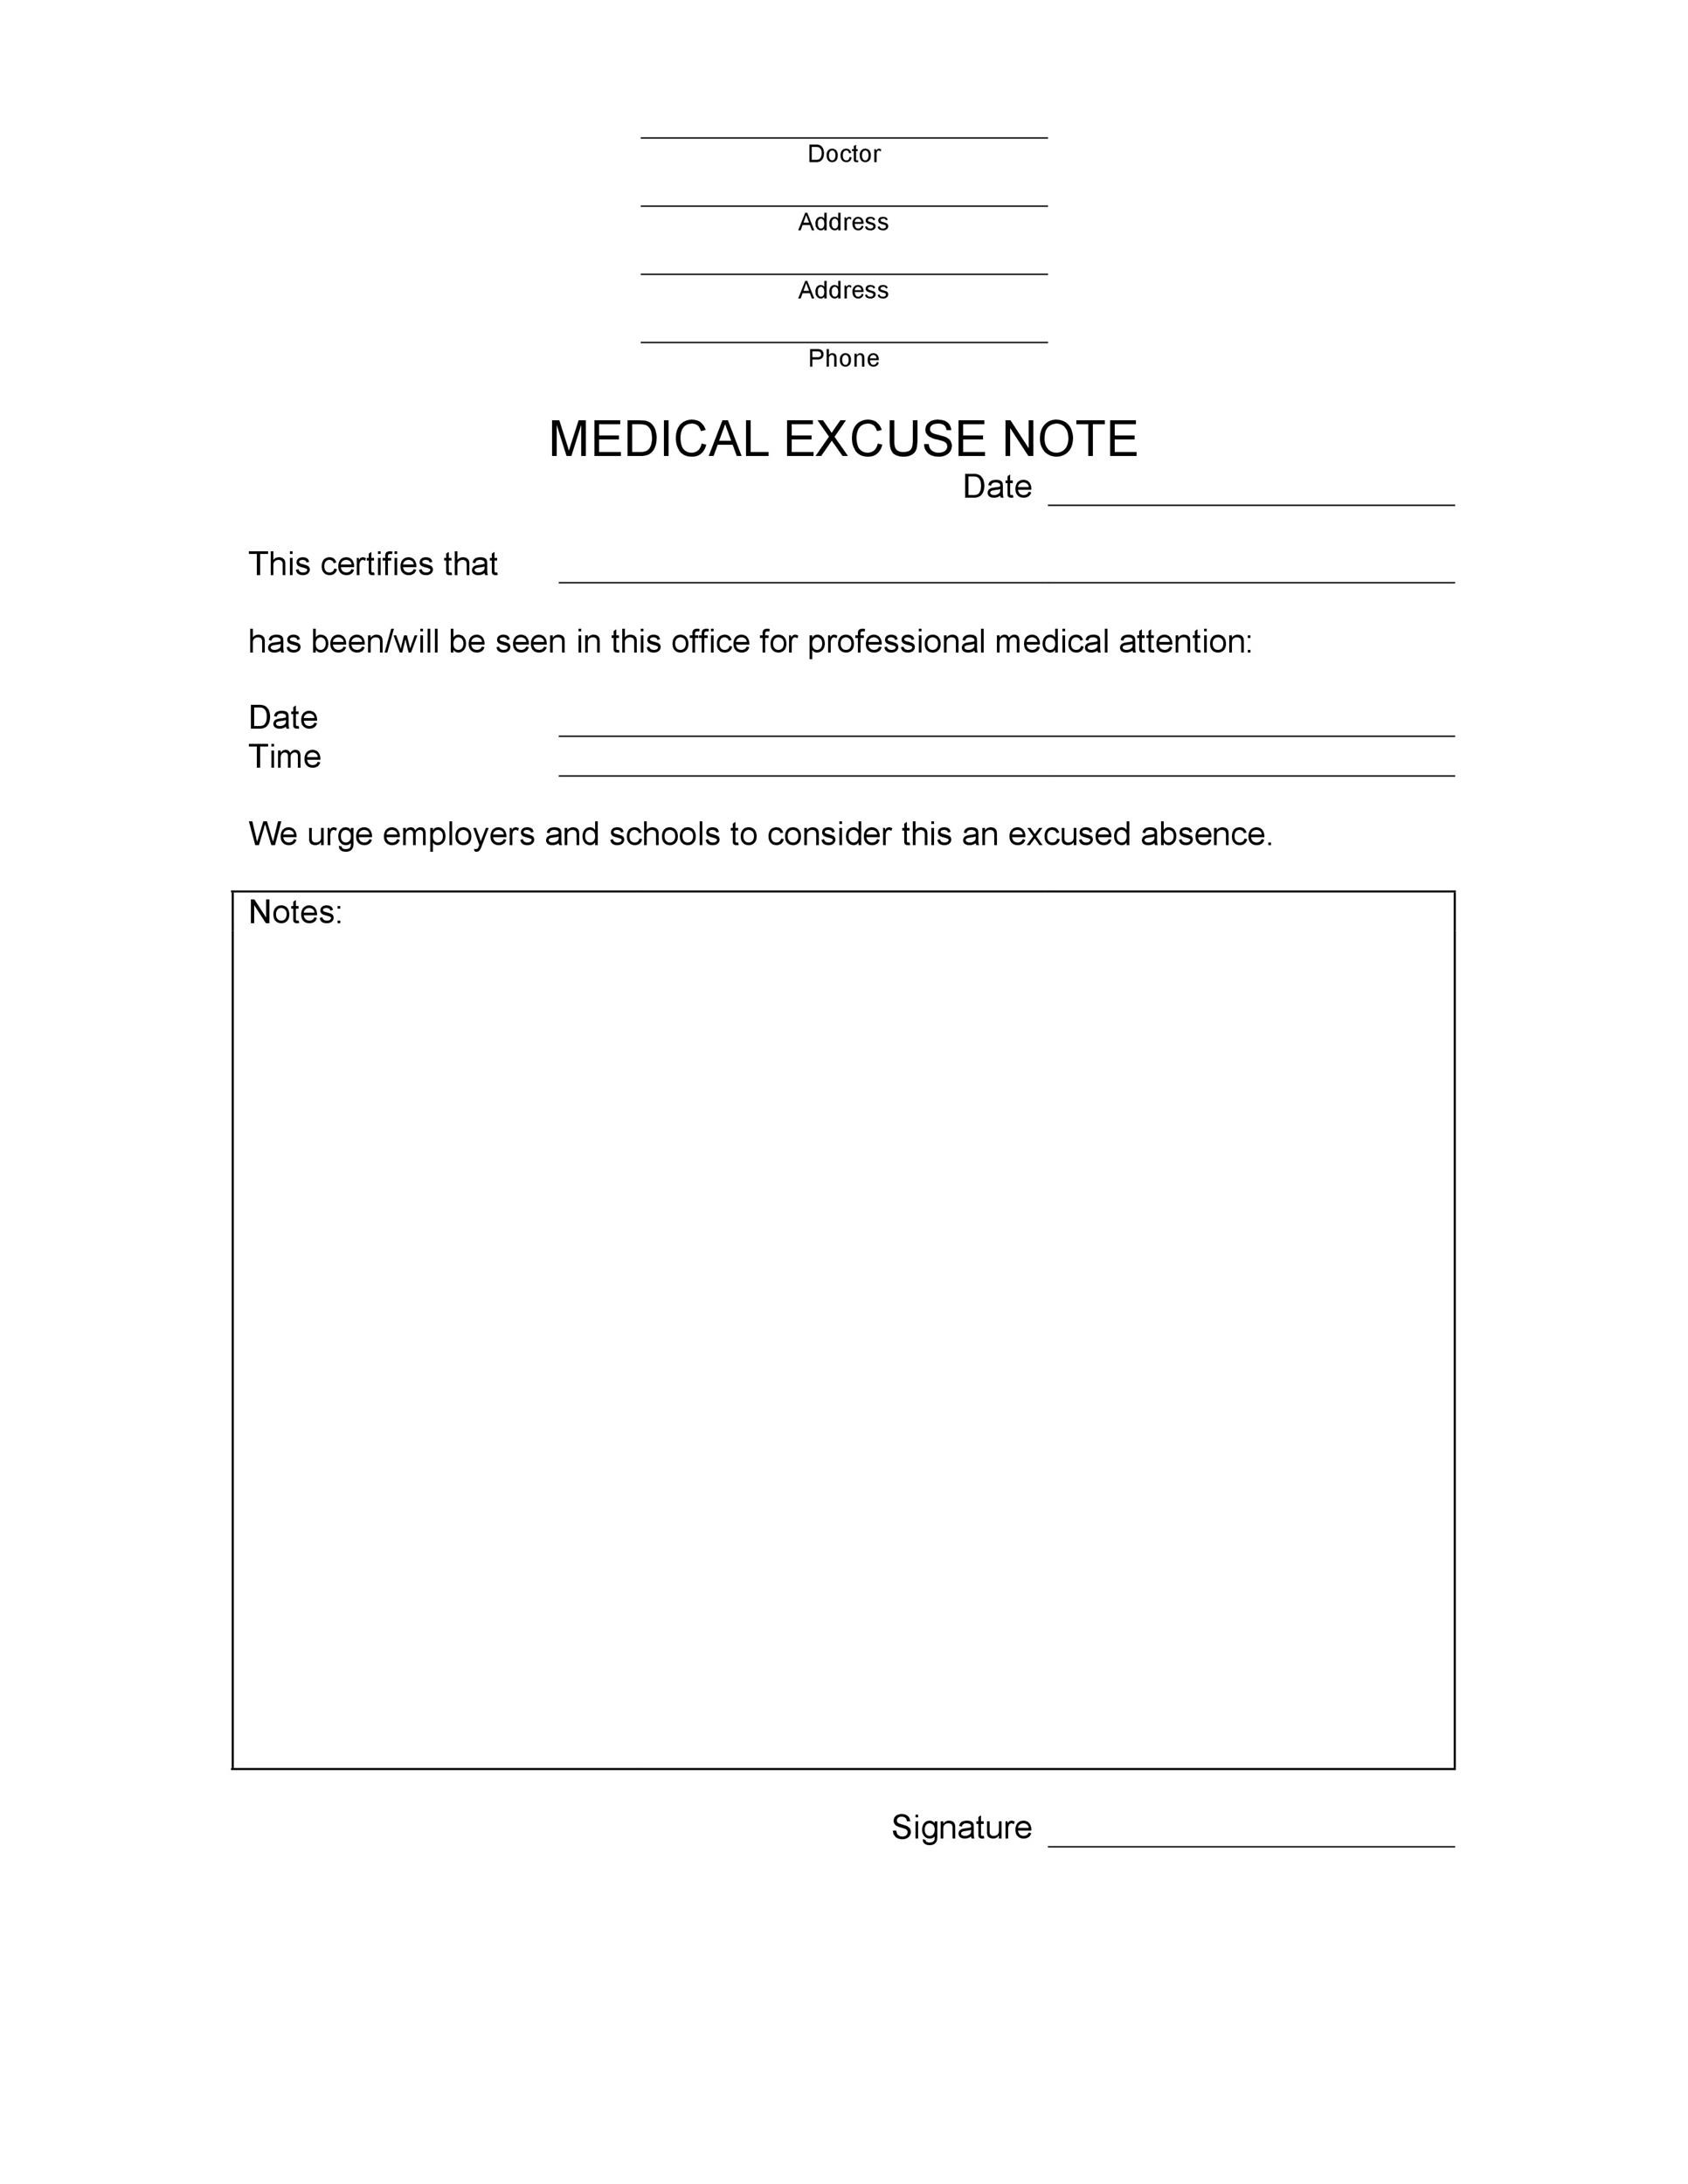 25 Free Doctor Note Excuse Templates ᐅ Template Lab